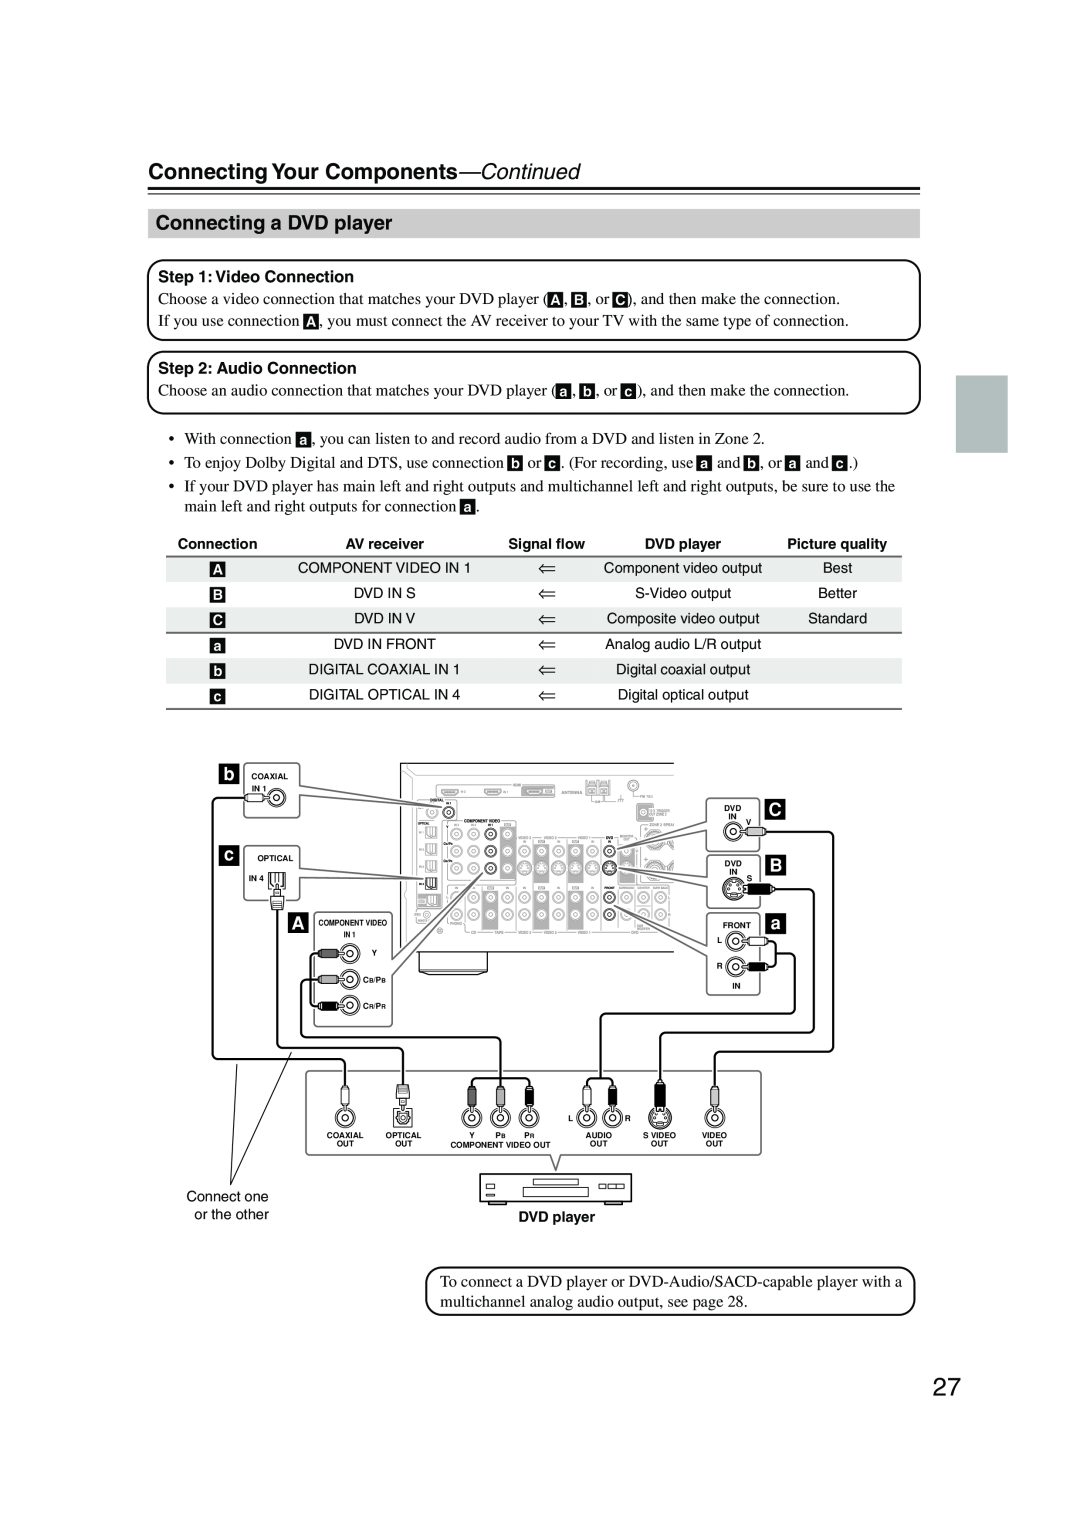 Onkyo SR804 instruction manual Connecting a DVD player, Connecting Your Components—Continued, C B a, or the other 